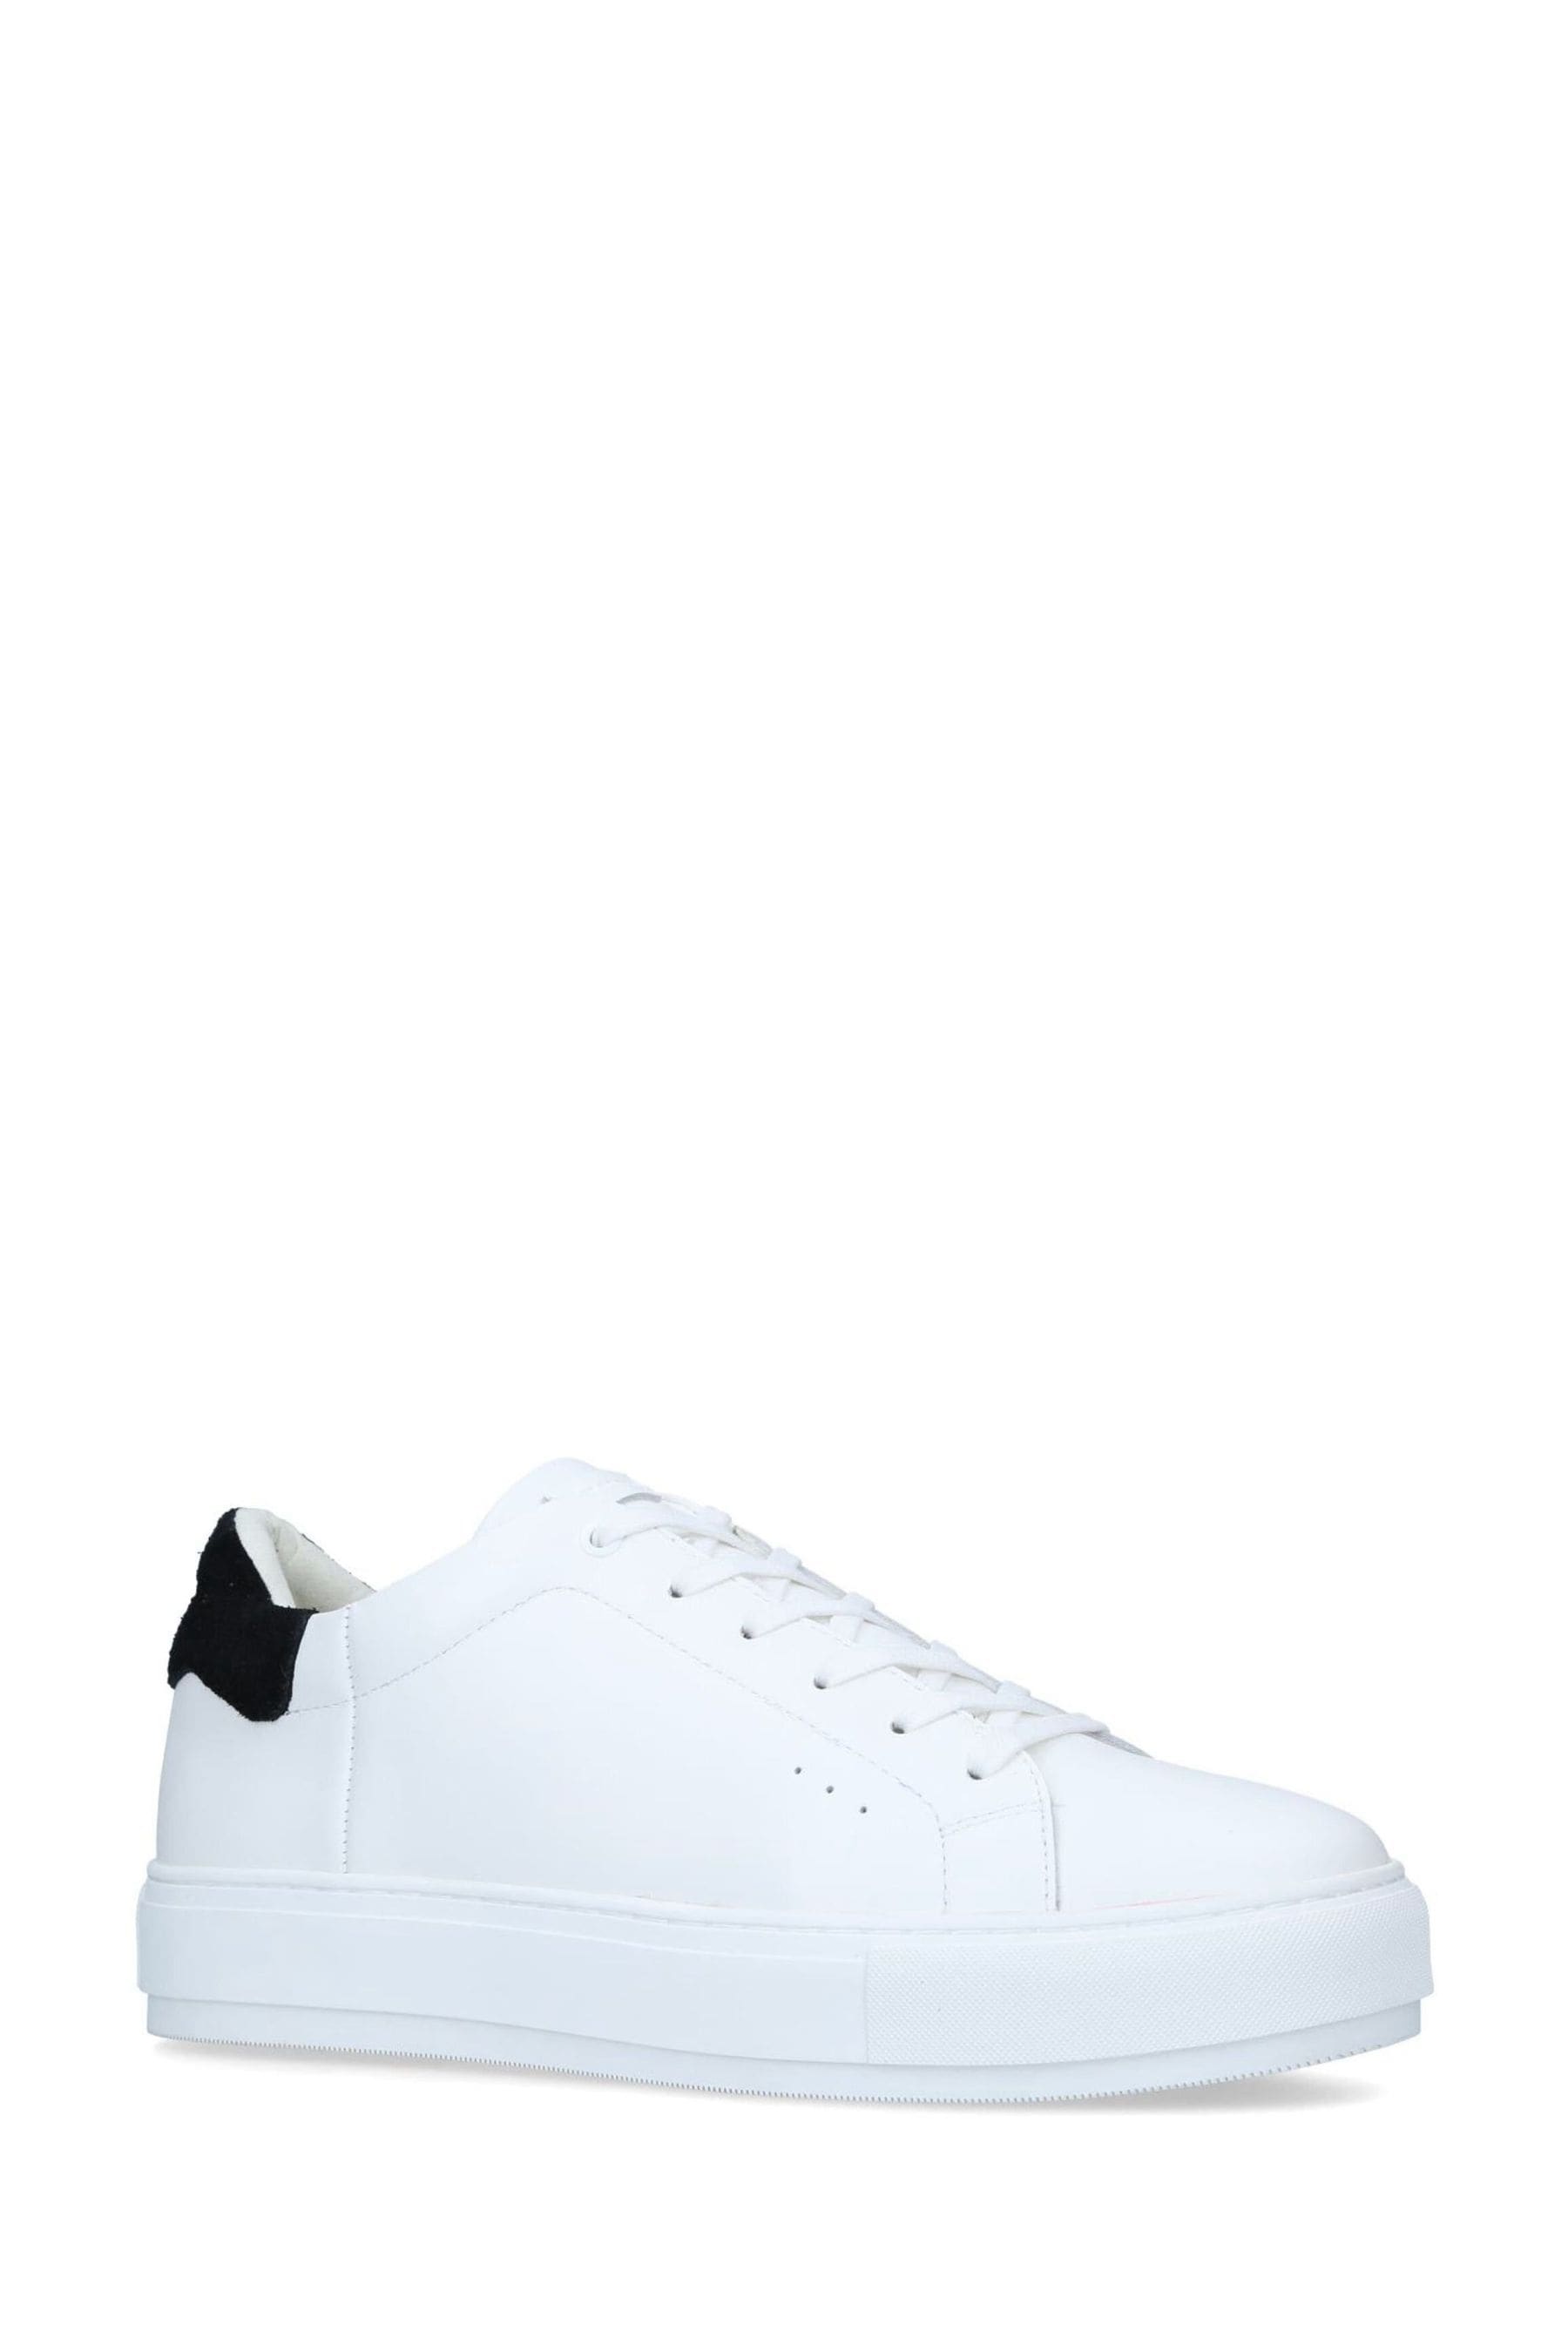 Buy Kurt Geiger London White Laney Mens Trainers from the Next UK ...